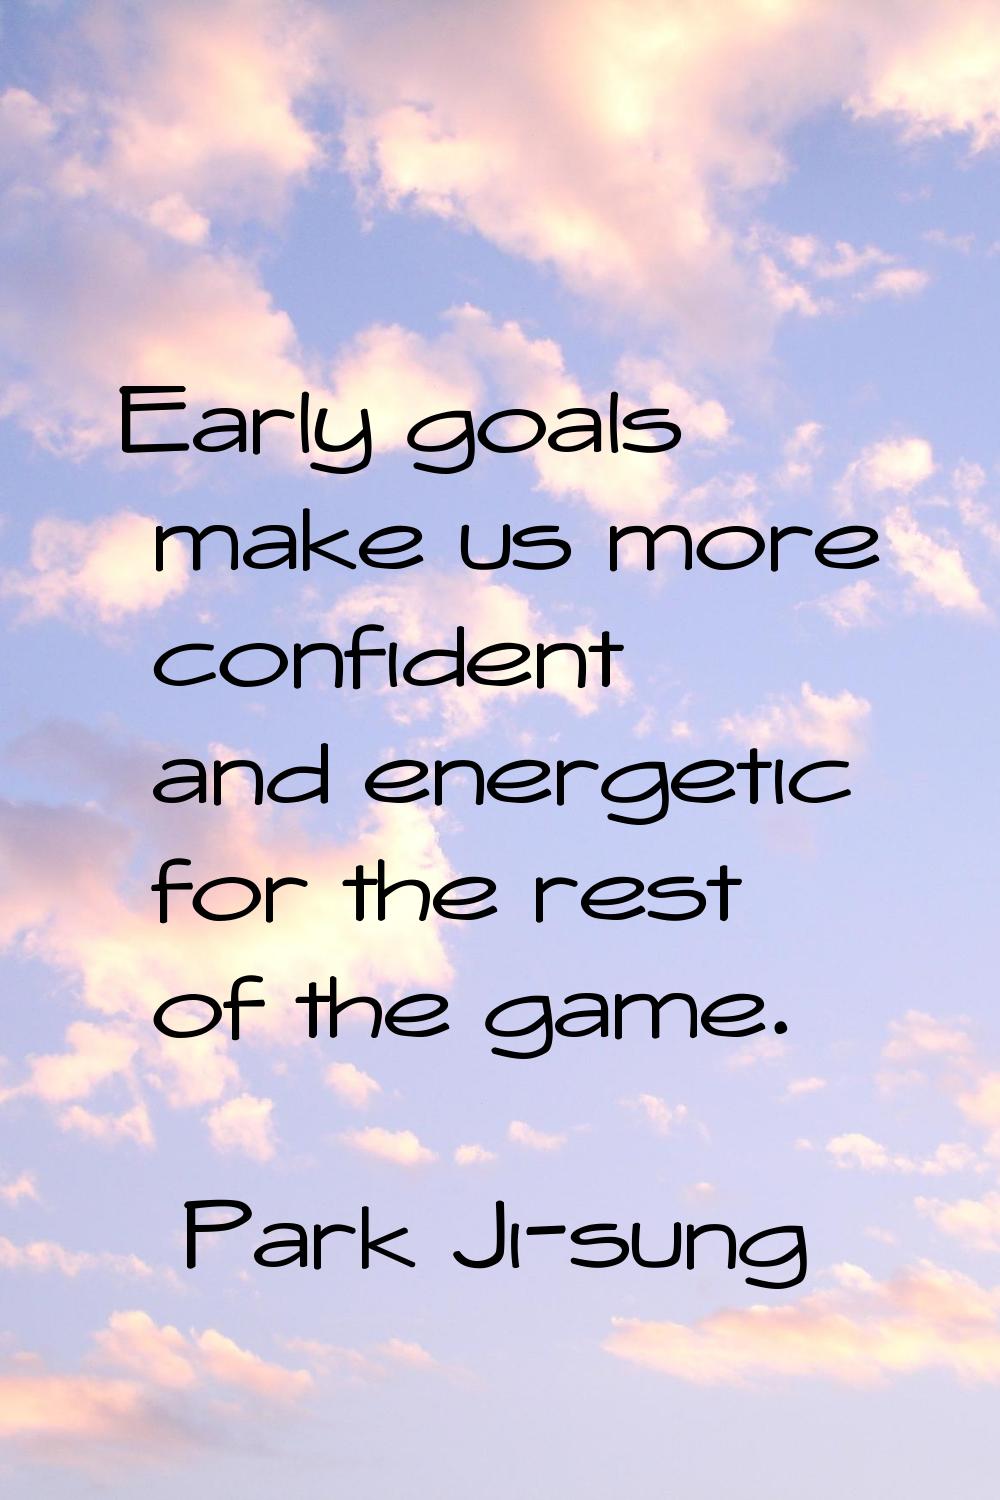 Early goals make us more confident and energetic for the rest of the game.